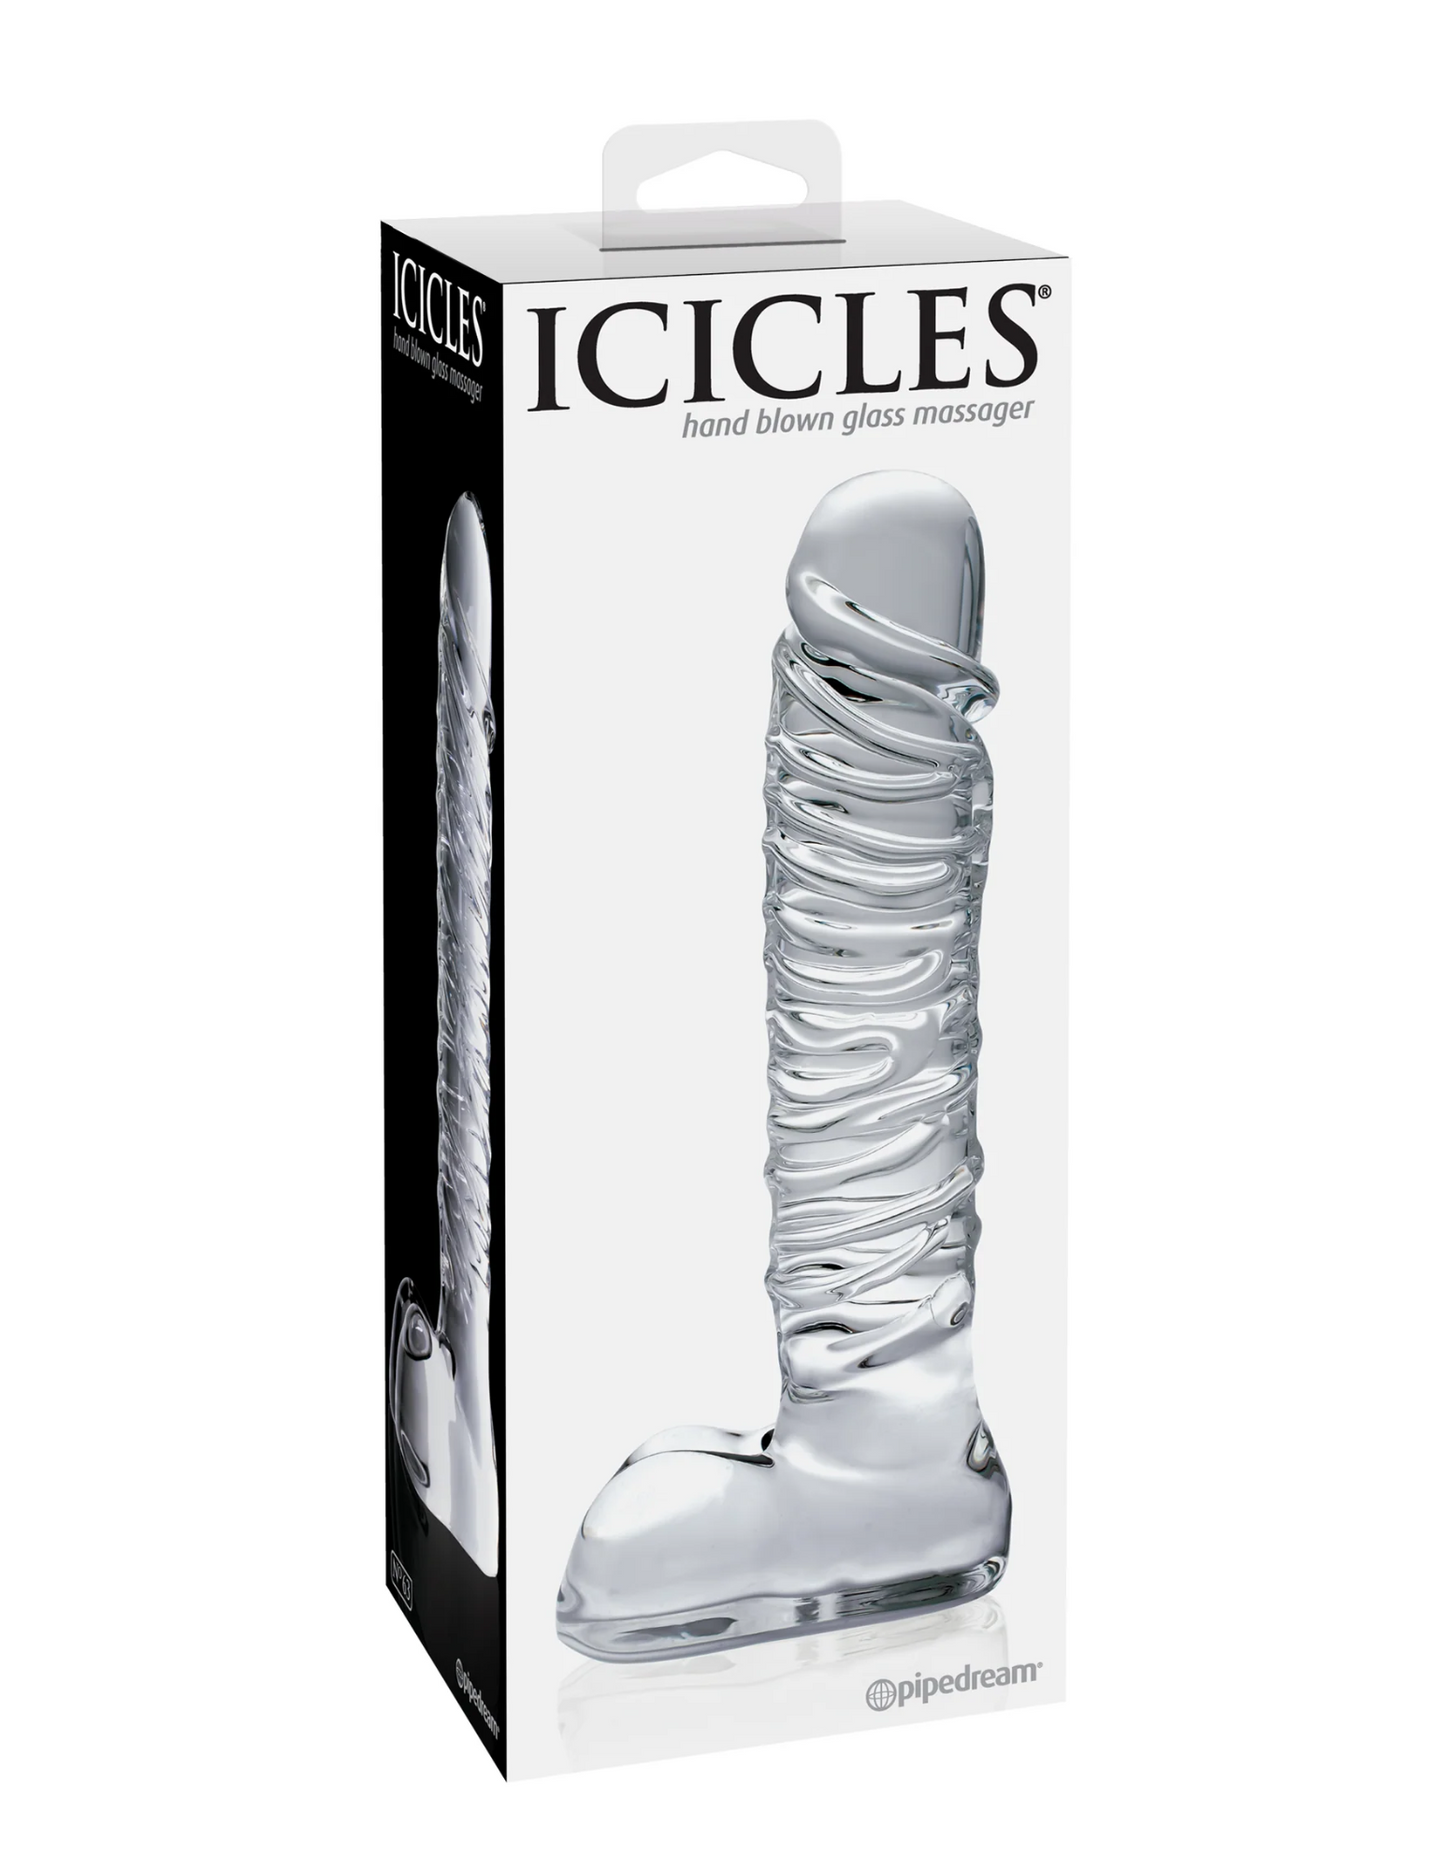 Photo of the box for the No. 63 Textured Glass Dildo w/ Balls from Pipedreams (clear).